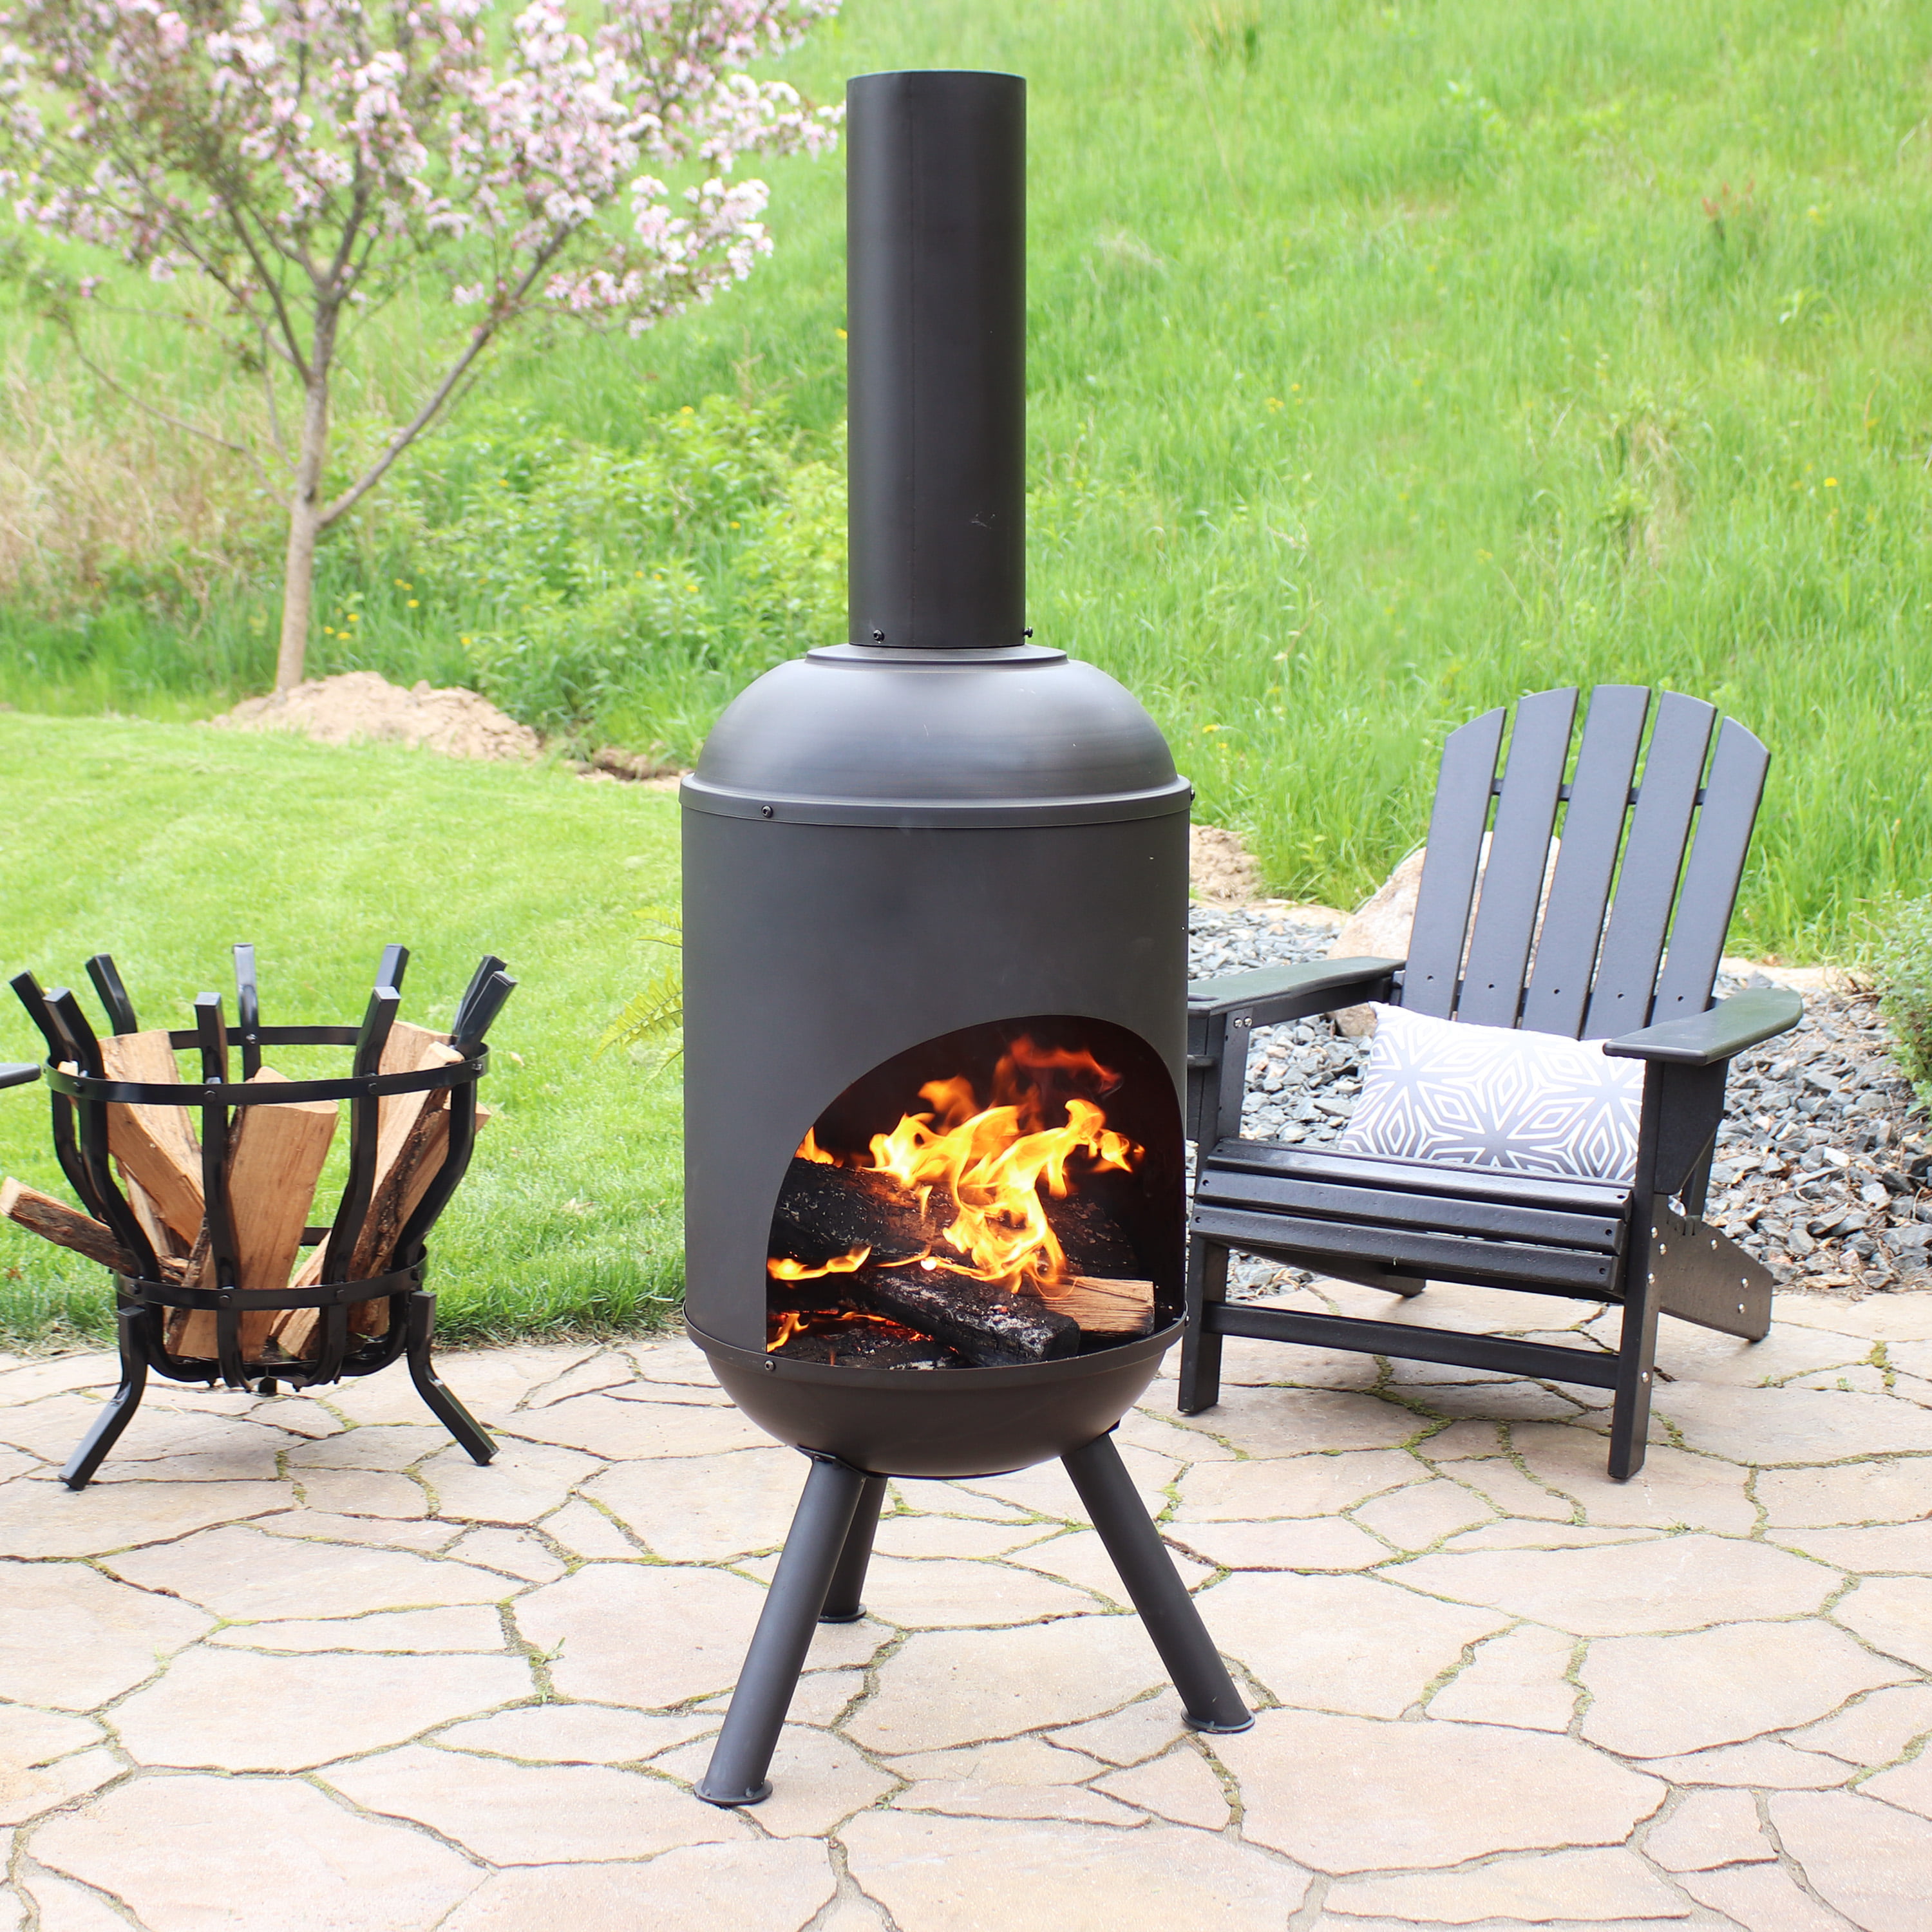 Sunnydaze Outdoor Wood Burning Fire Pit Chiminea 57 Inch Black Steel Firepit with Log Grate and Poker Metal Patio Fireplace with 360-Degree View 